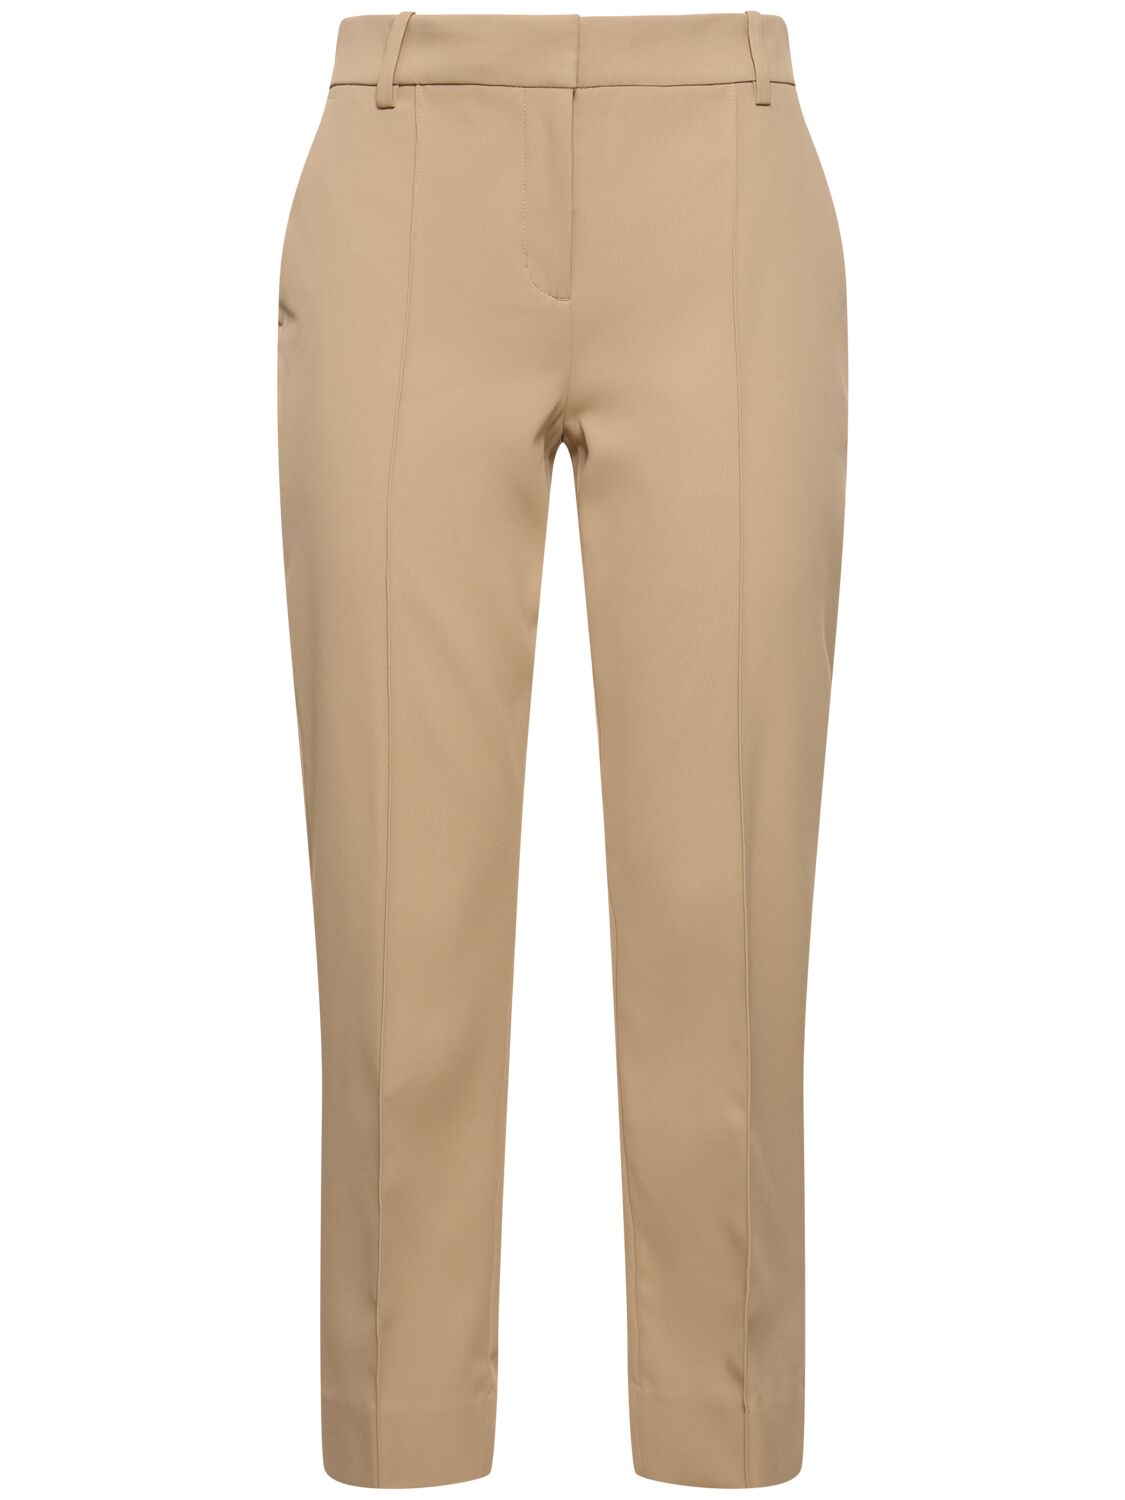 Image of Technical Twill Golf Pants